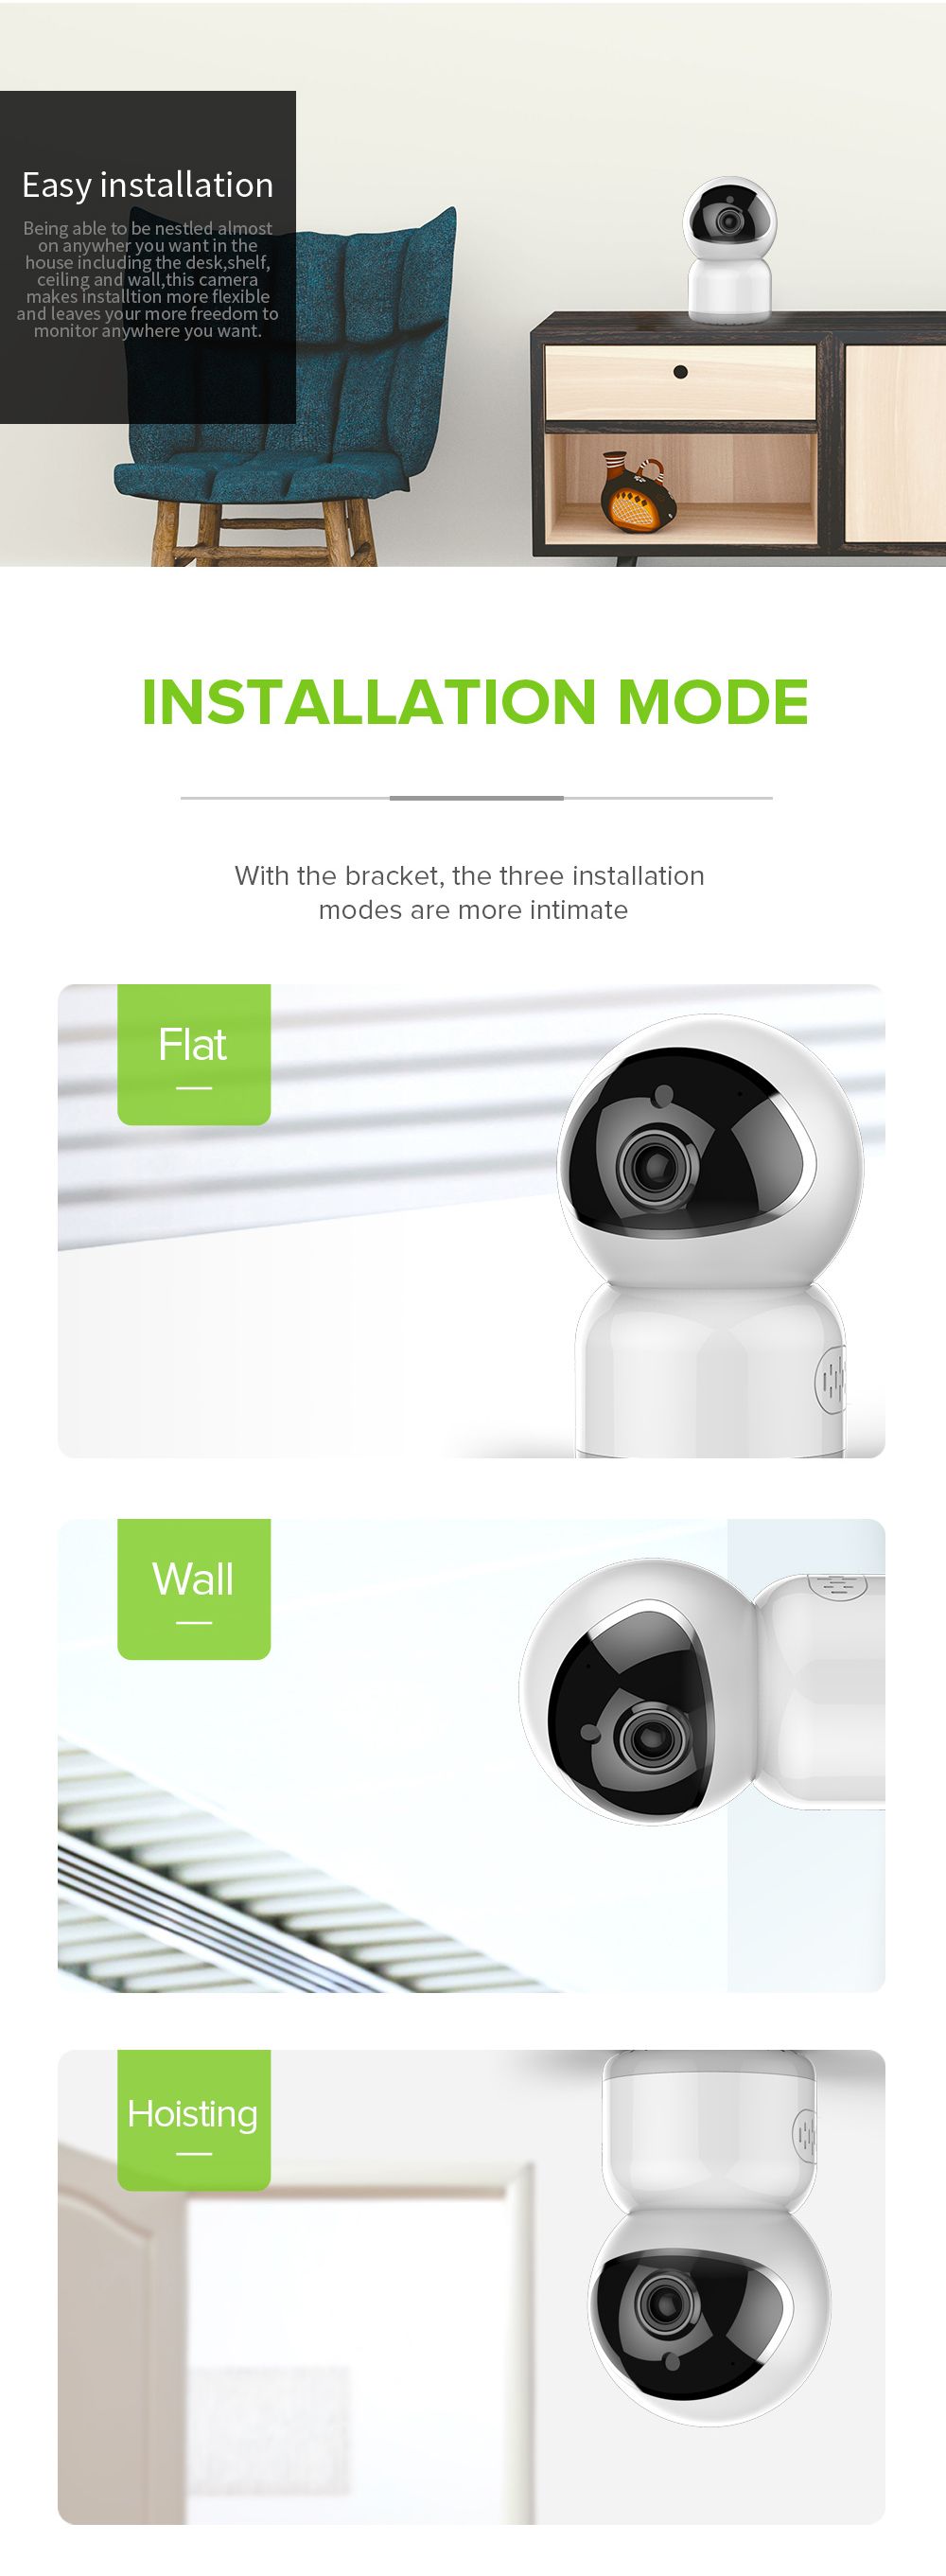 HD-1MP-2MP-3MP-WIFI-IP-Camera-Pan--Tilt-Infrared-Night-Vision-Two-Way-Talk-Security-Camera-1532124